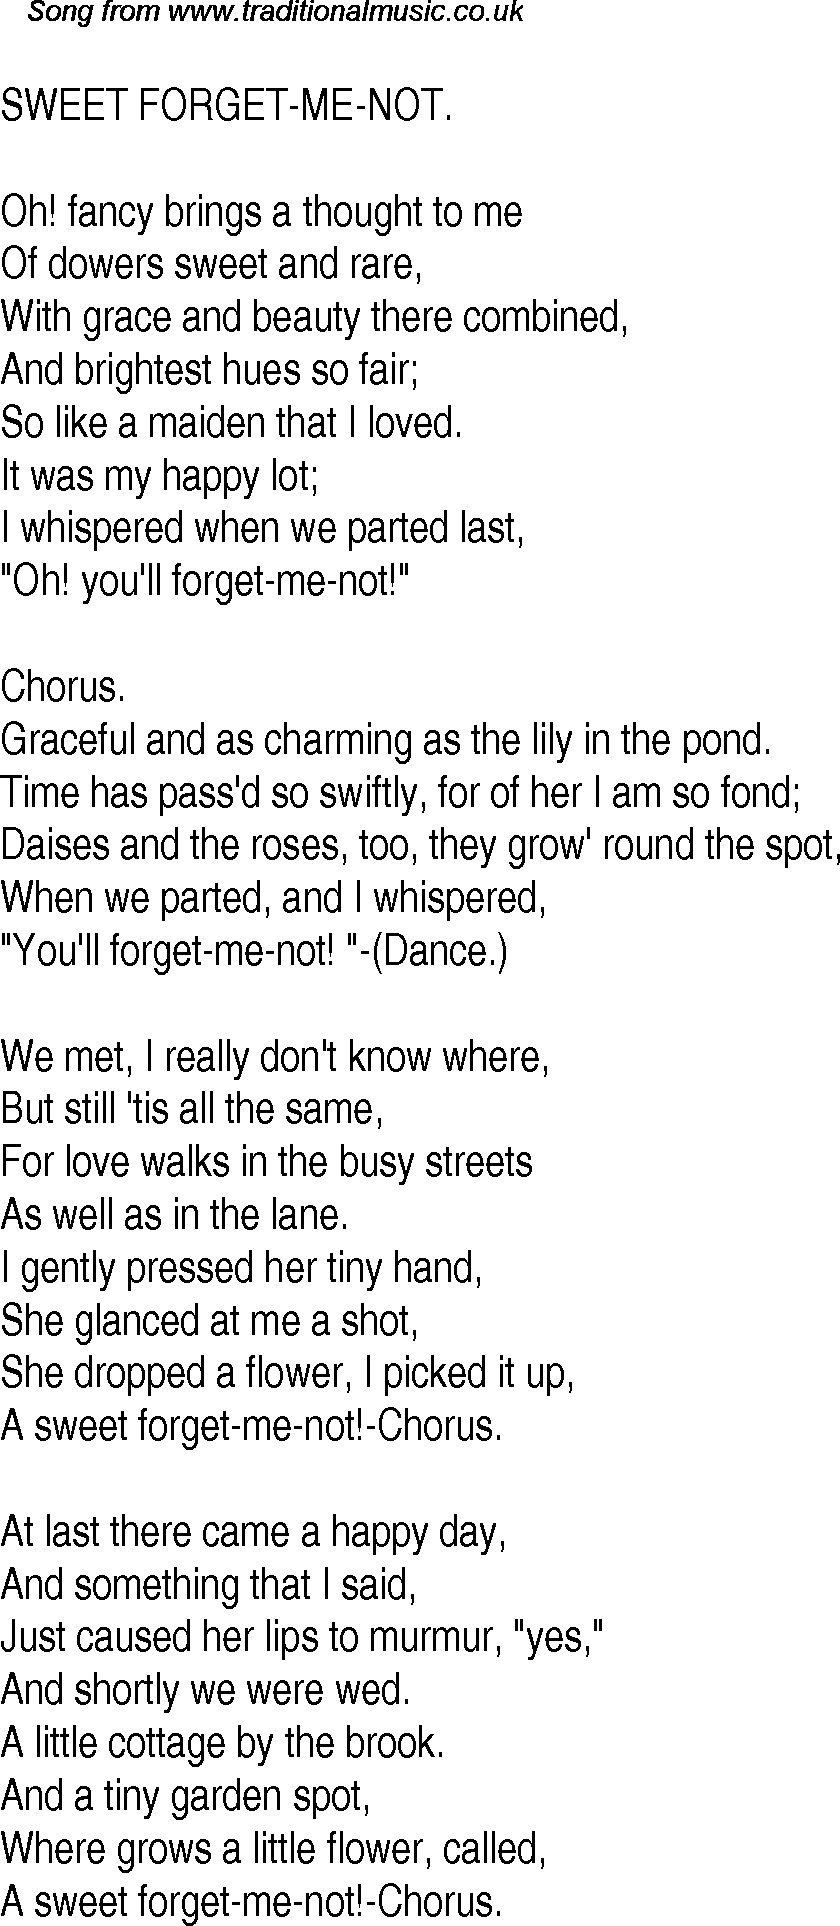 Old Time Song Lyrics For 23 Sweet Forget Me Not